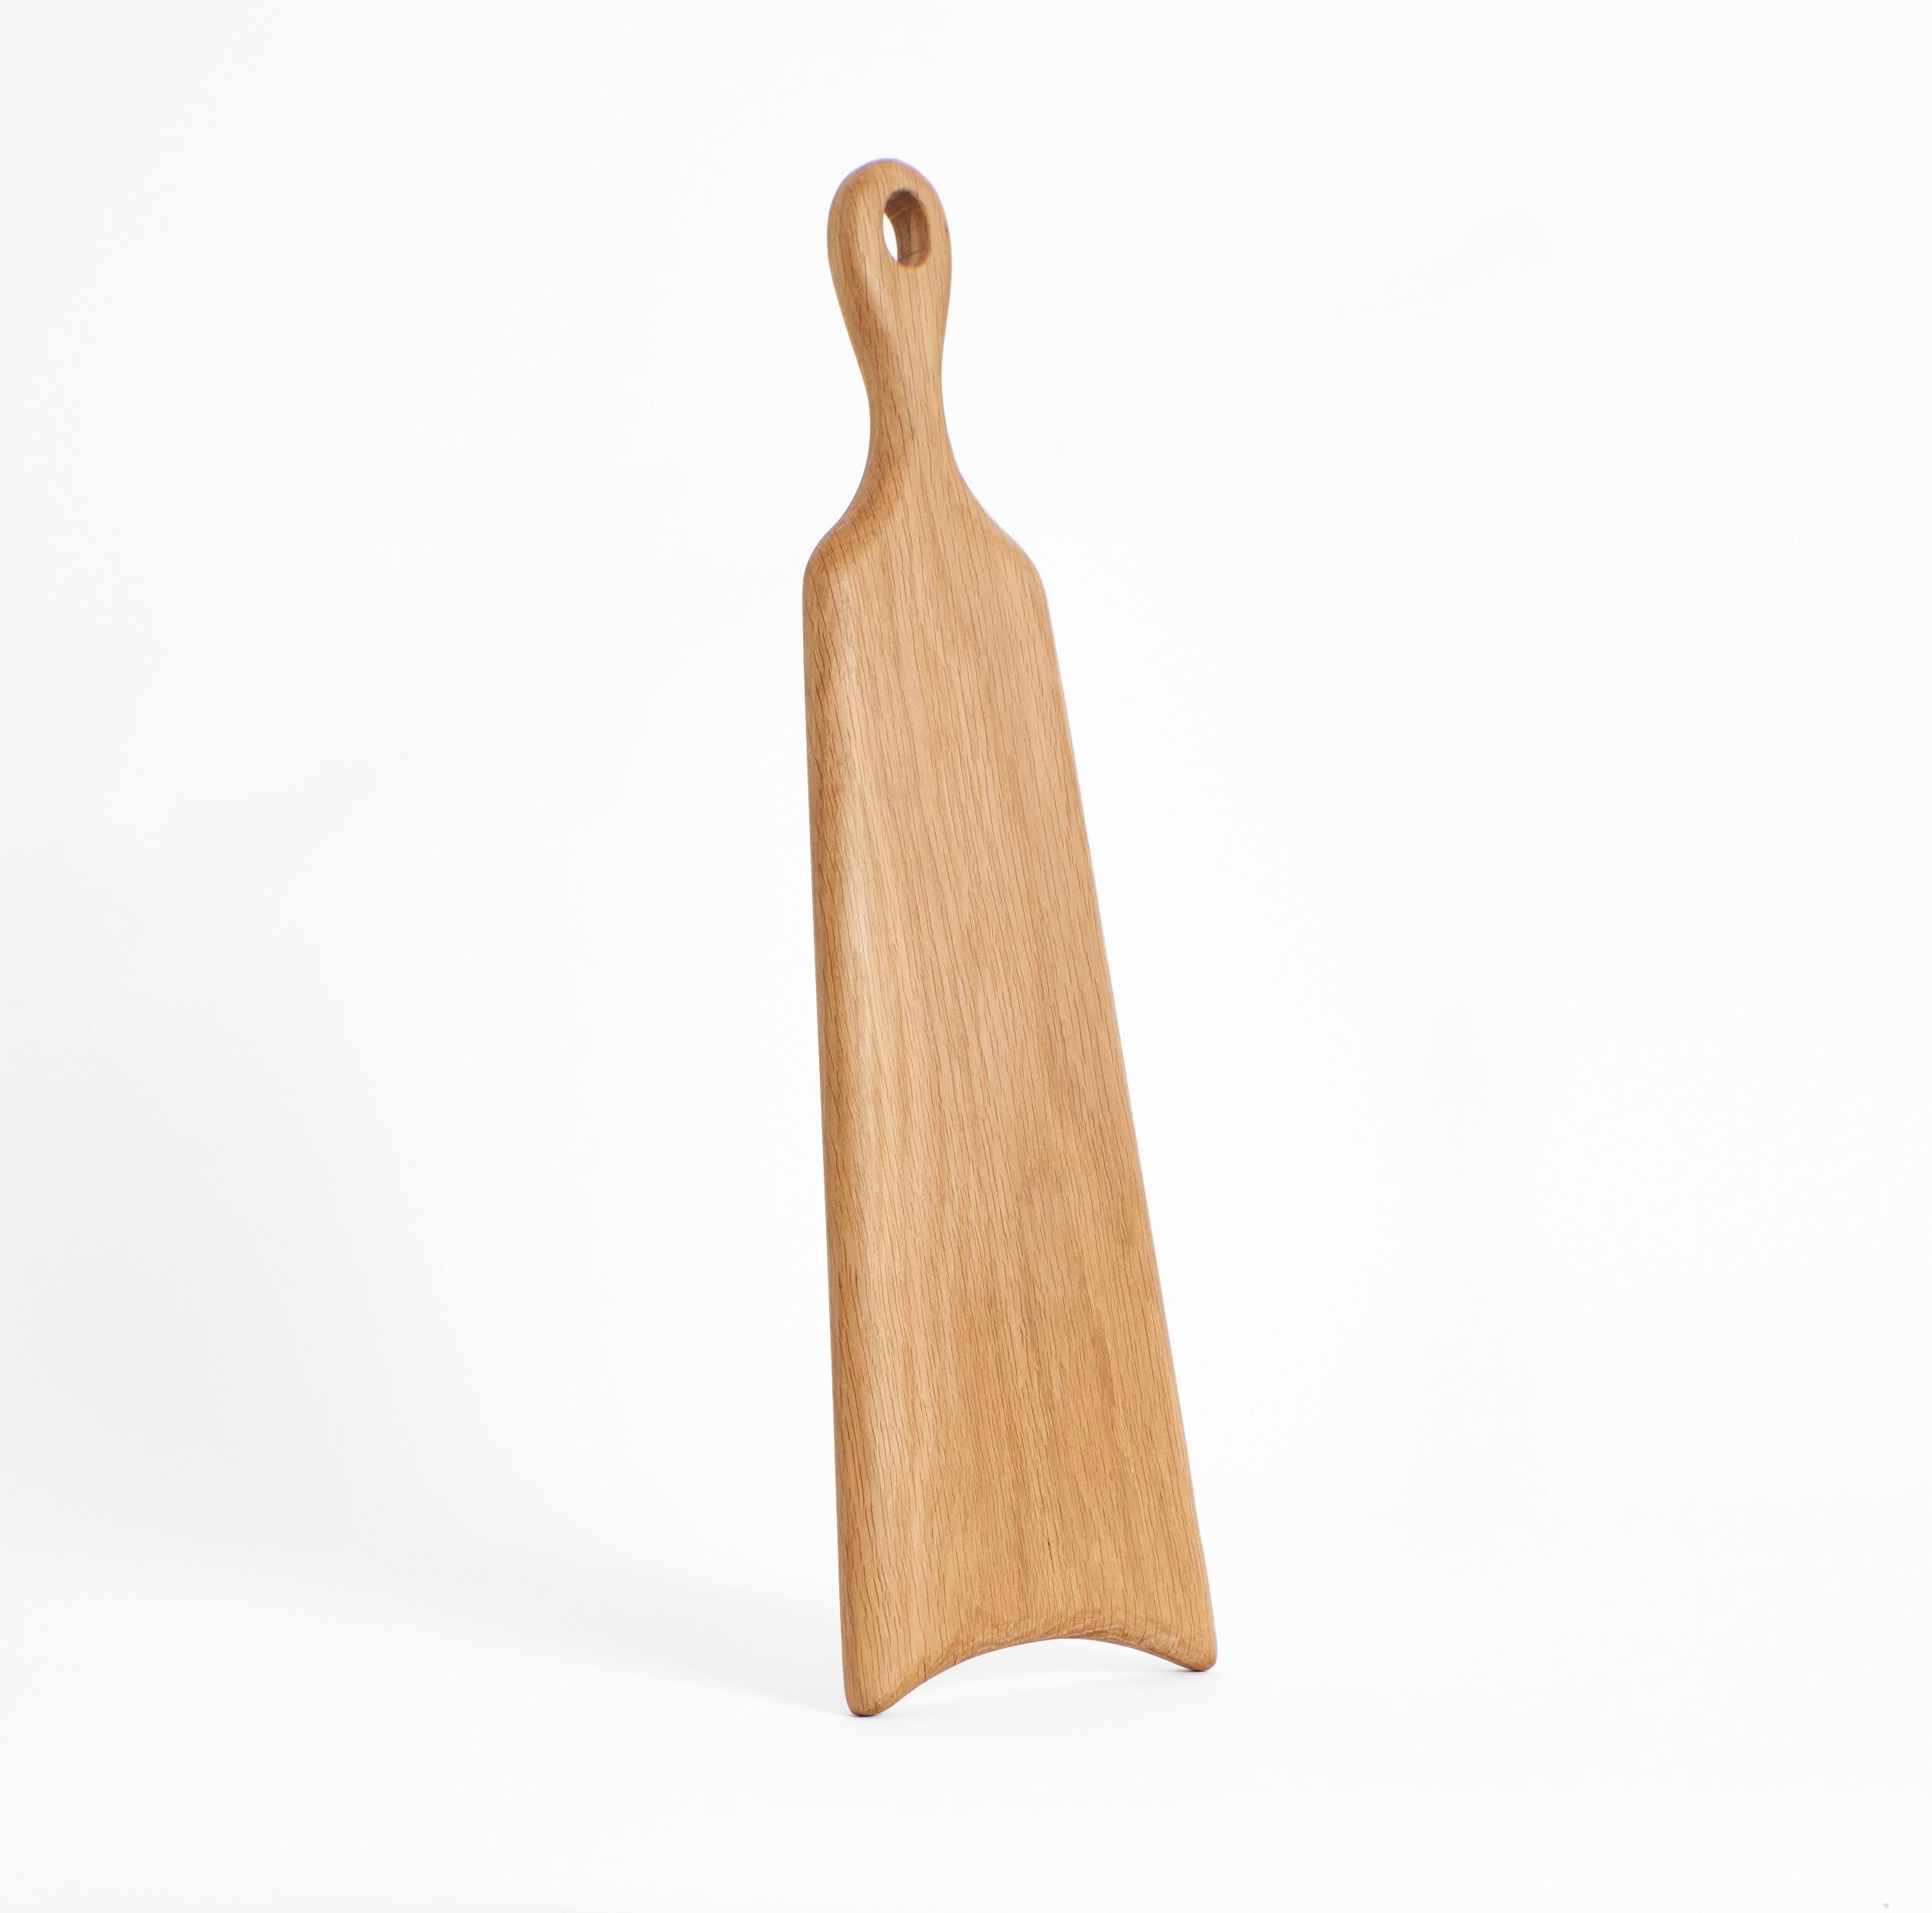 Hand-made Wooden board 

This long shaped board is hand-carved from oak. The boards as an individual or as part of the family will become a key item in every kitchen being decorative as well as functional. 
Available in three other sizes and wood